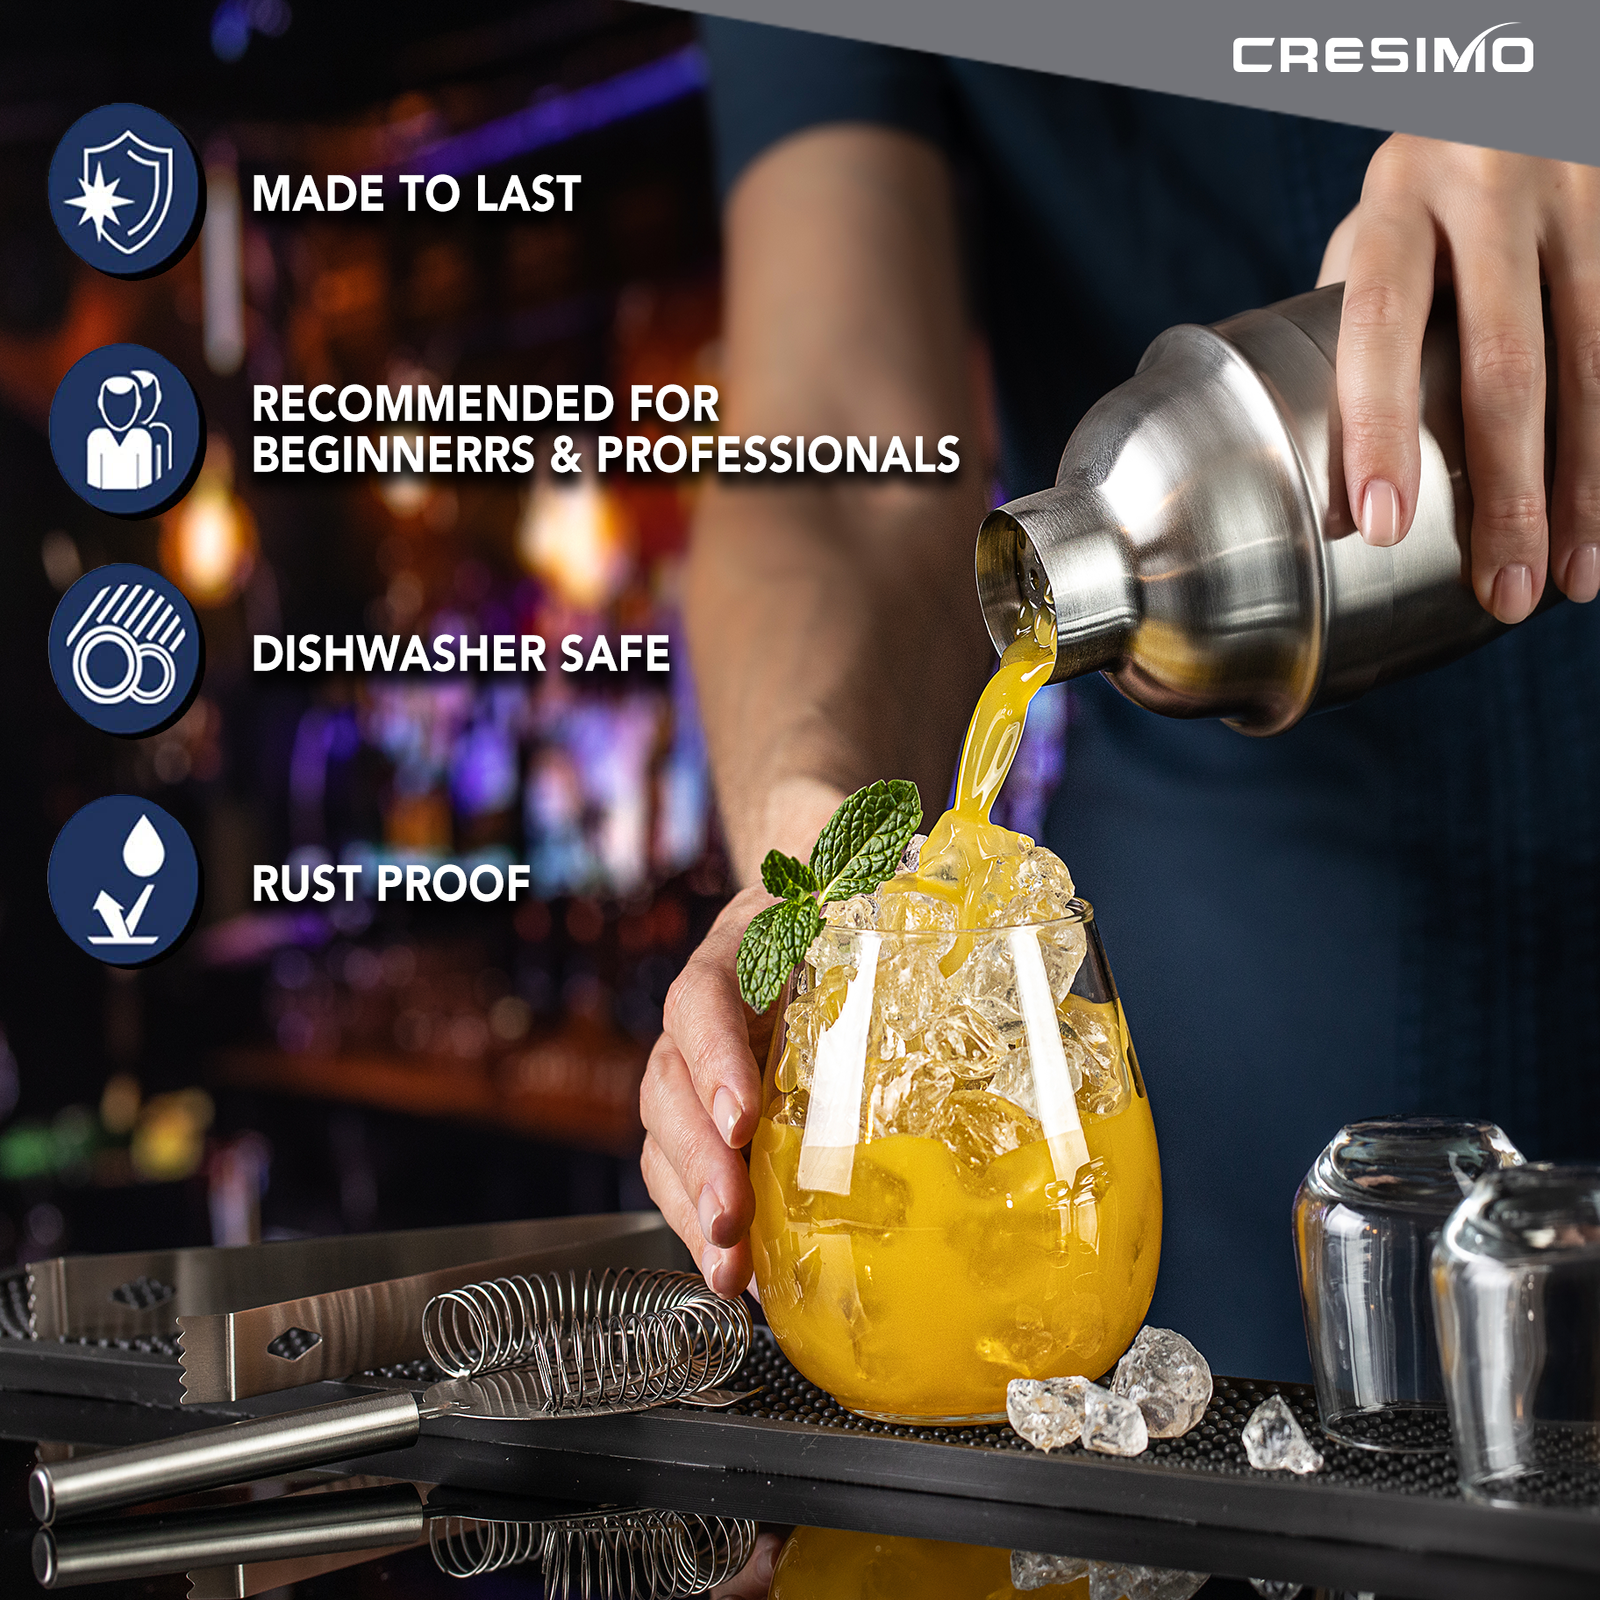 Cresimo 24 Ounce Cocktail Shaker Plus Drink Recipes Booklet - Professional Stainless Steel Bar Tools - Built-in Bartender Strainer